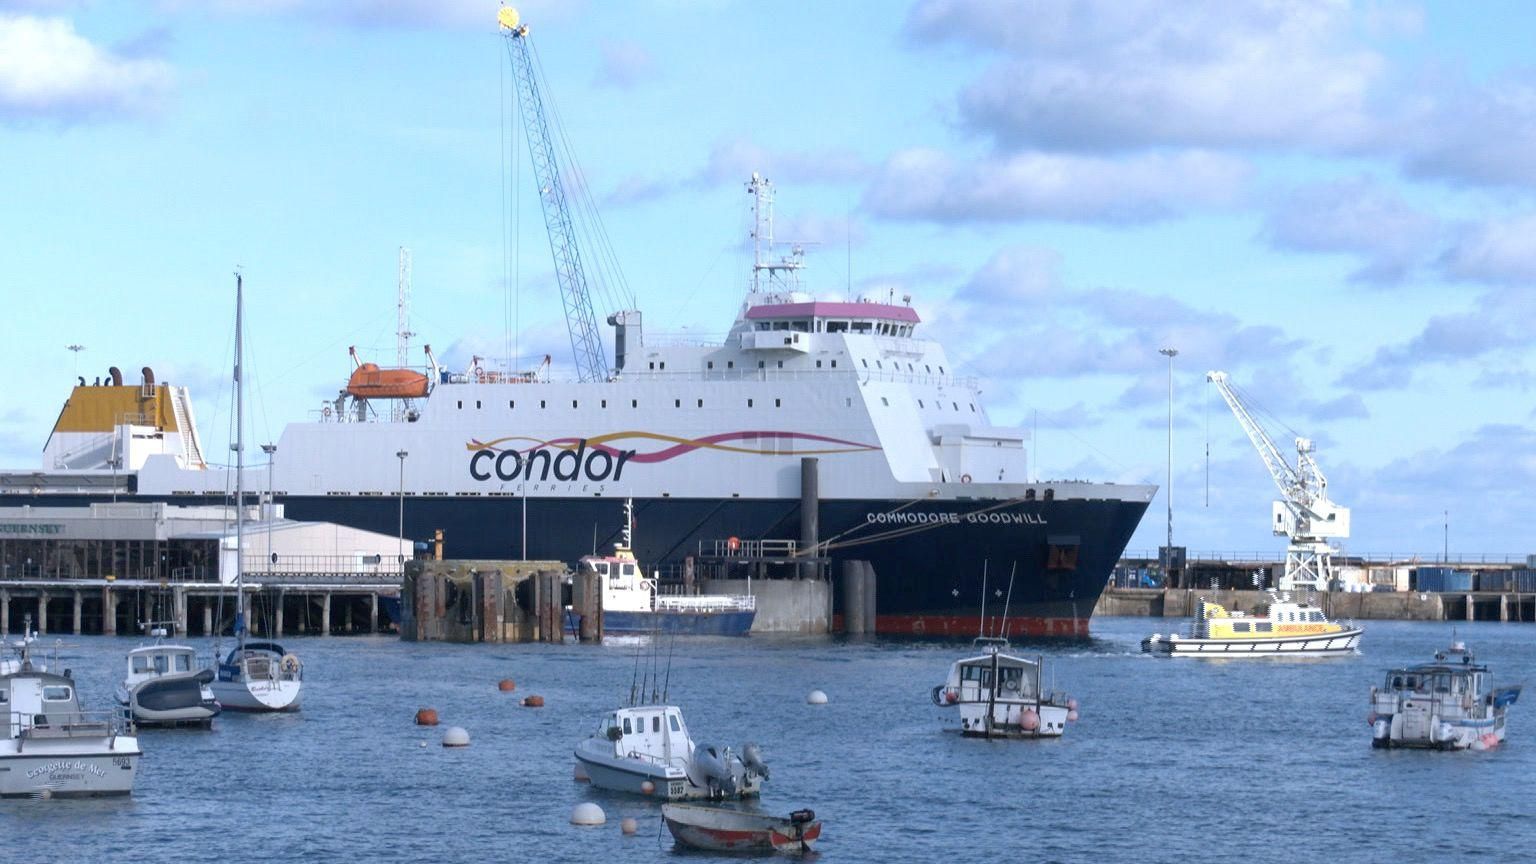 Condor Goodwill in harbour